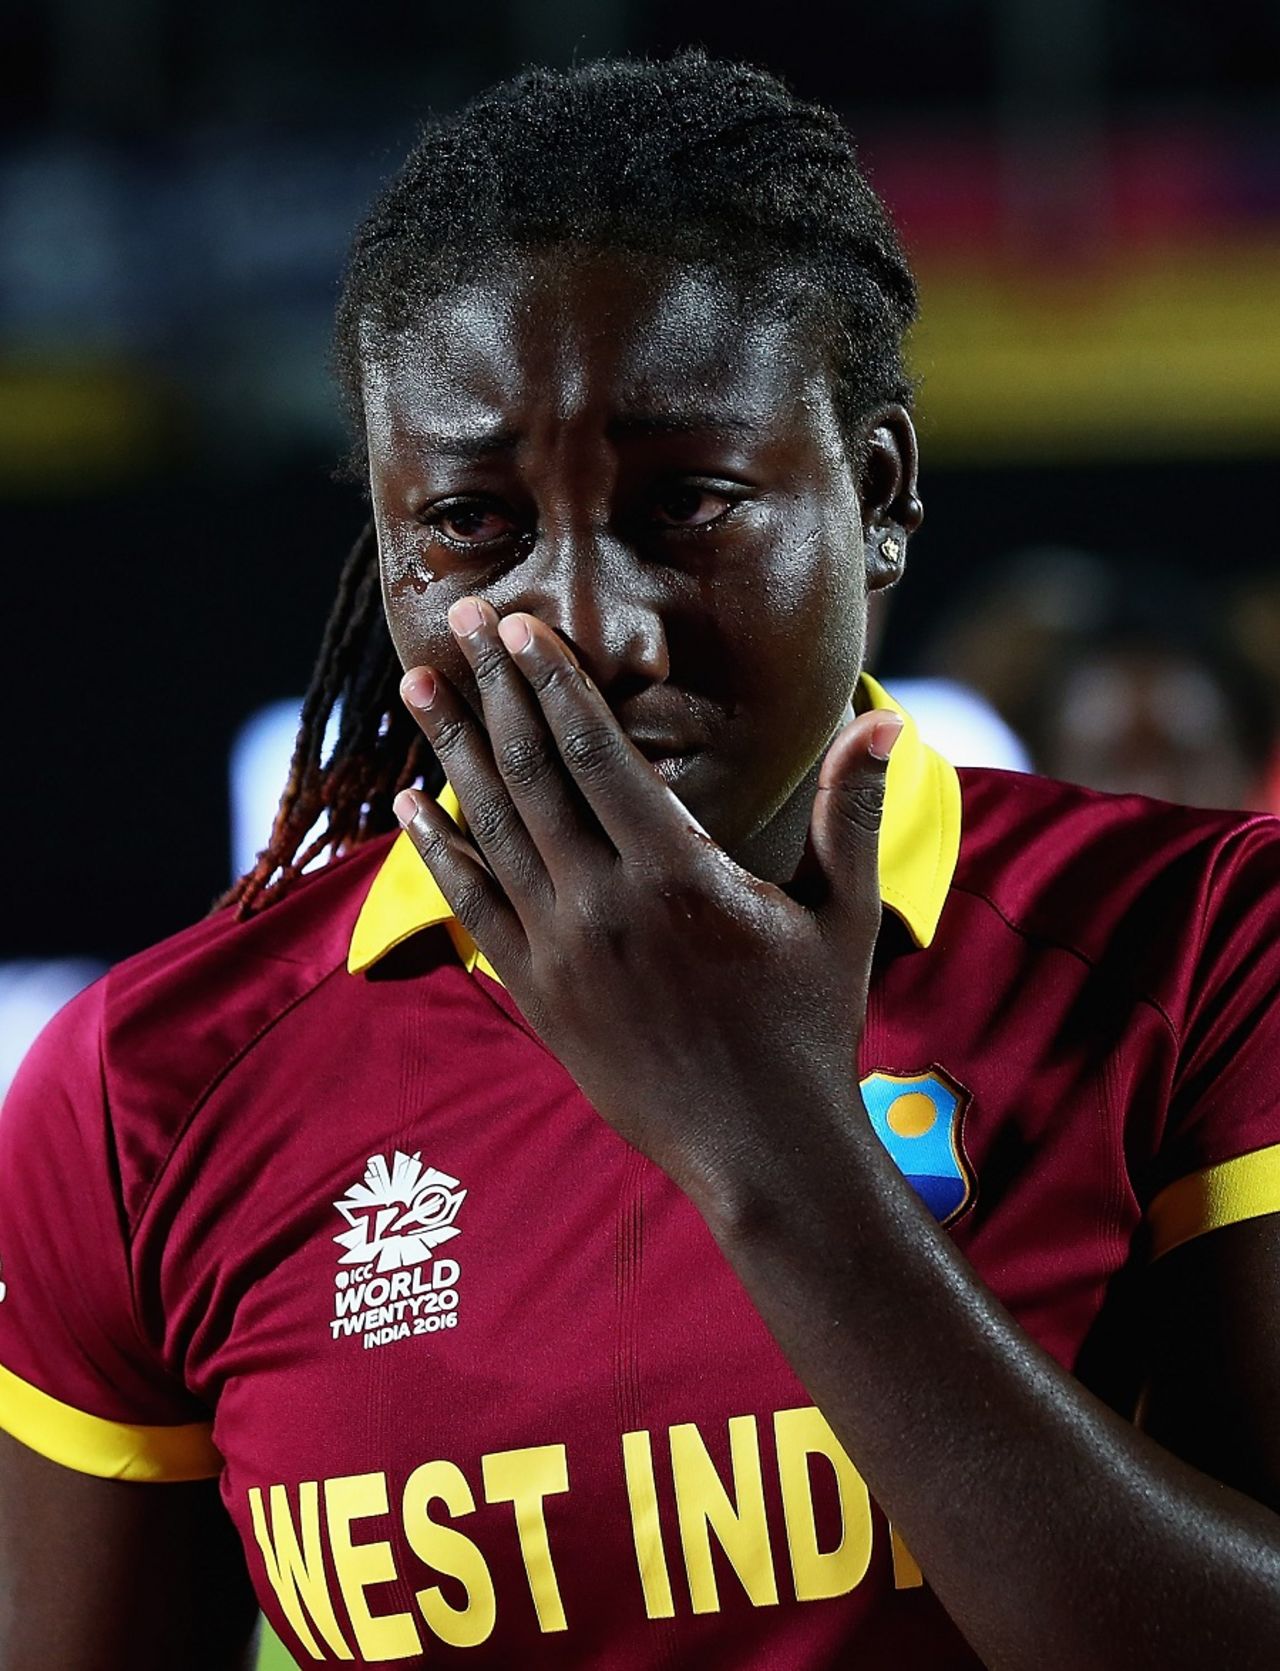 A teary-eyed Stafanie Taylor after West Indies fell short off the last ball, England v West Indies, Women's World T20, Group B, March 24, 2016